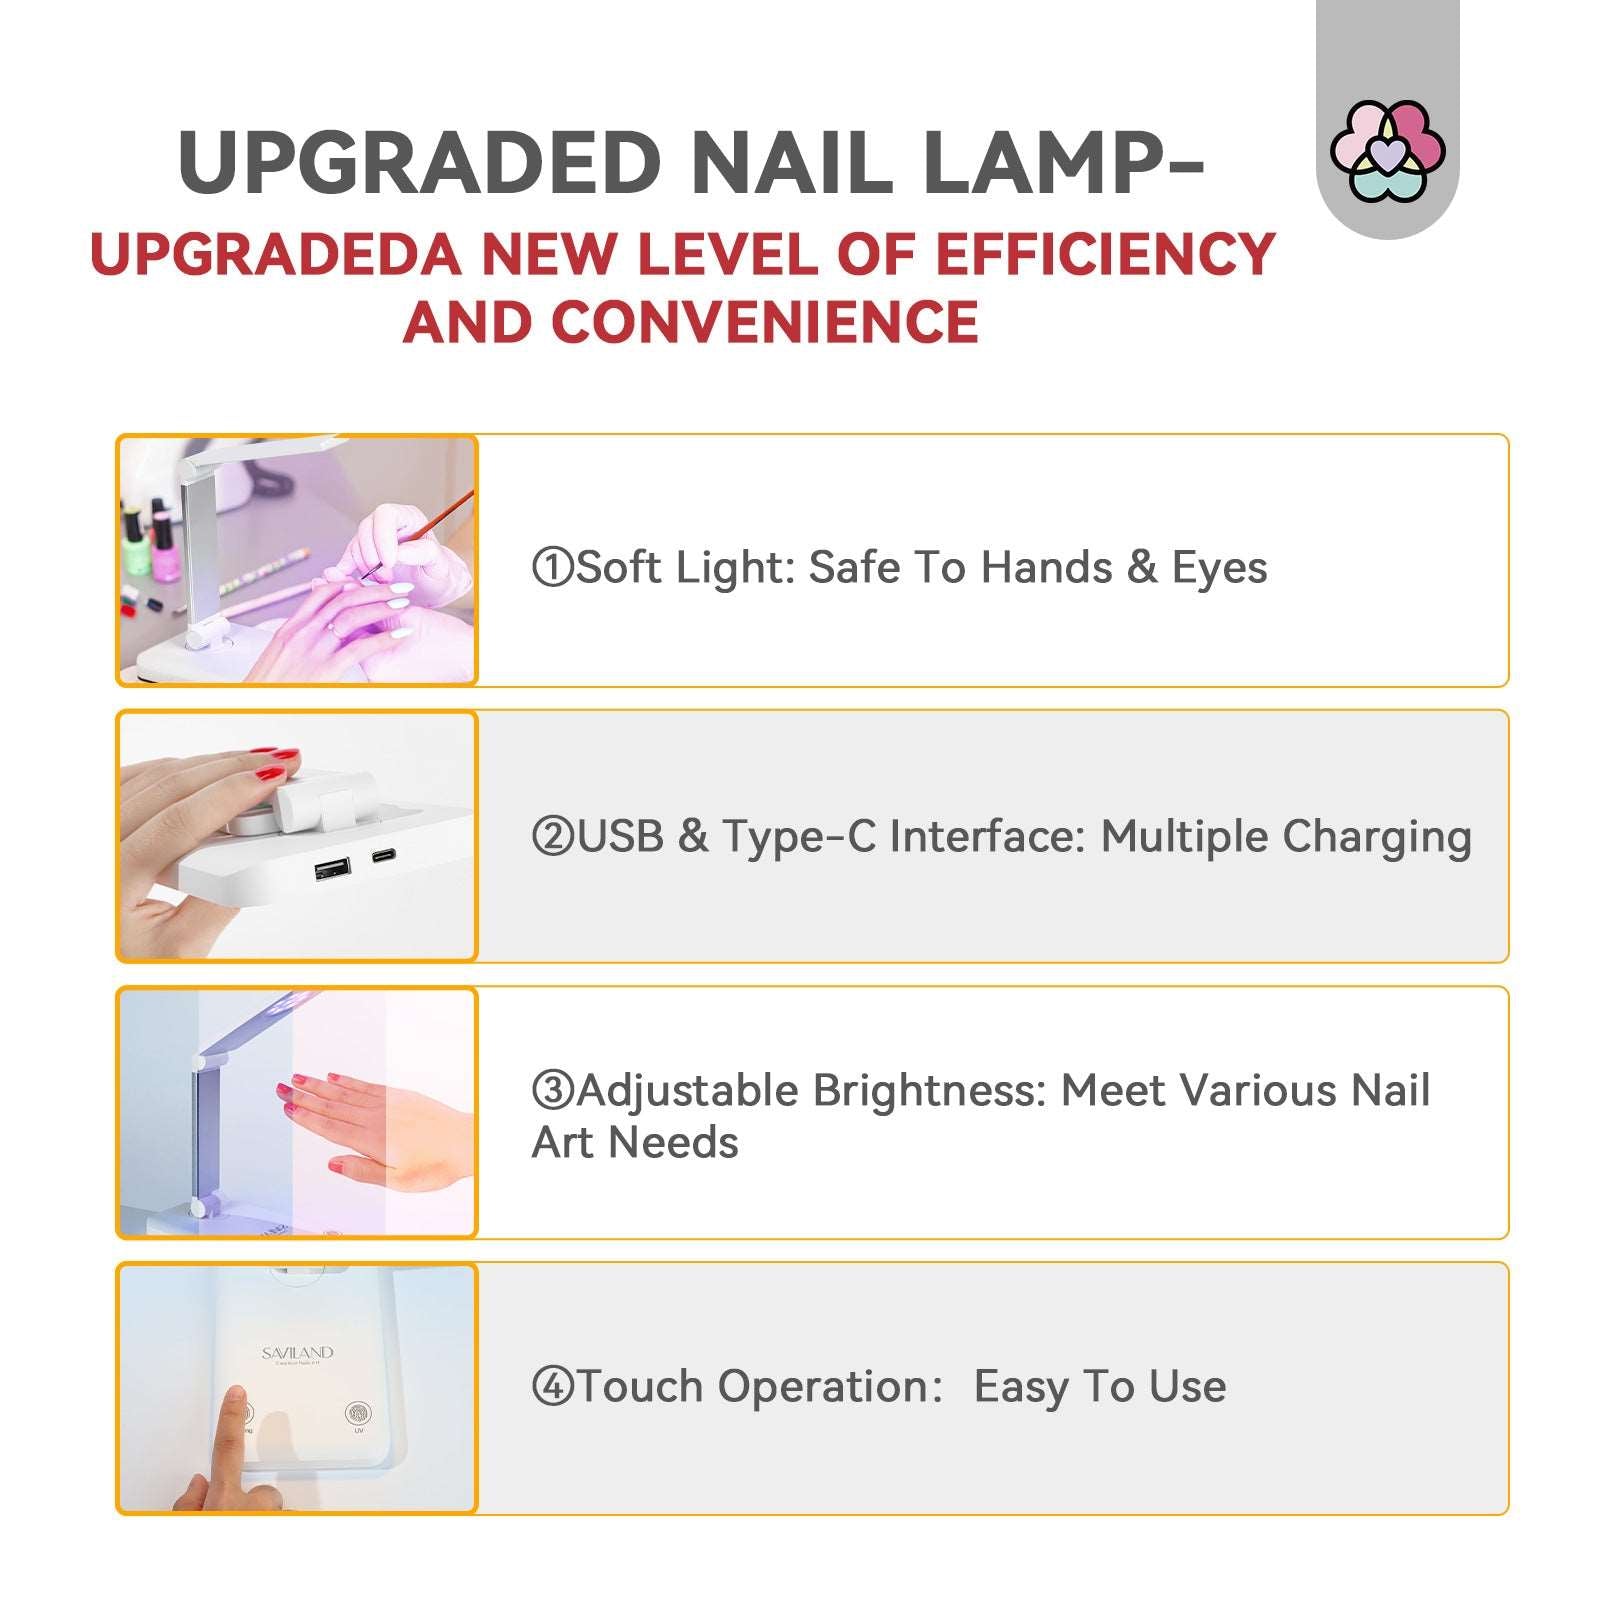 2 IN 1 U V LED Nail Lamp - 8 U V Beads 30 Lighting Beads 24W Foldable Touch Button